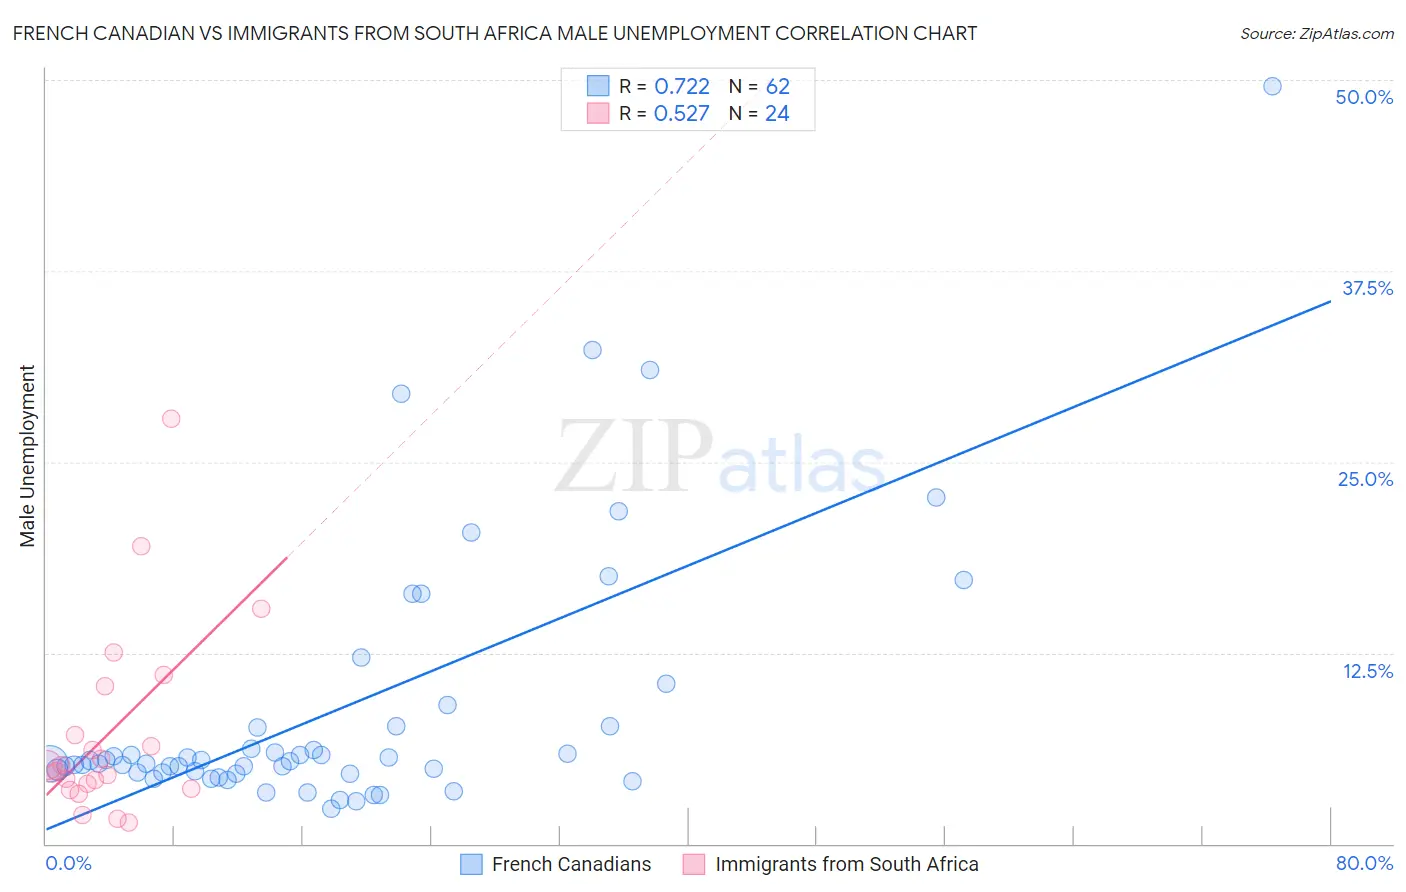 French Canadian vs Immigrants from South Africa Male Unemployment